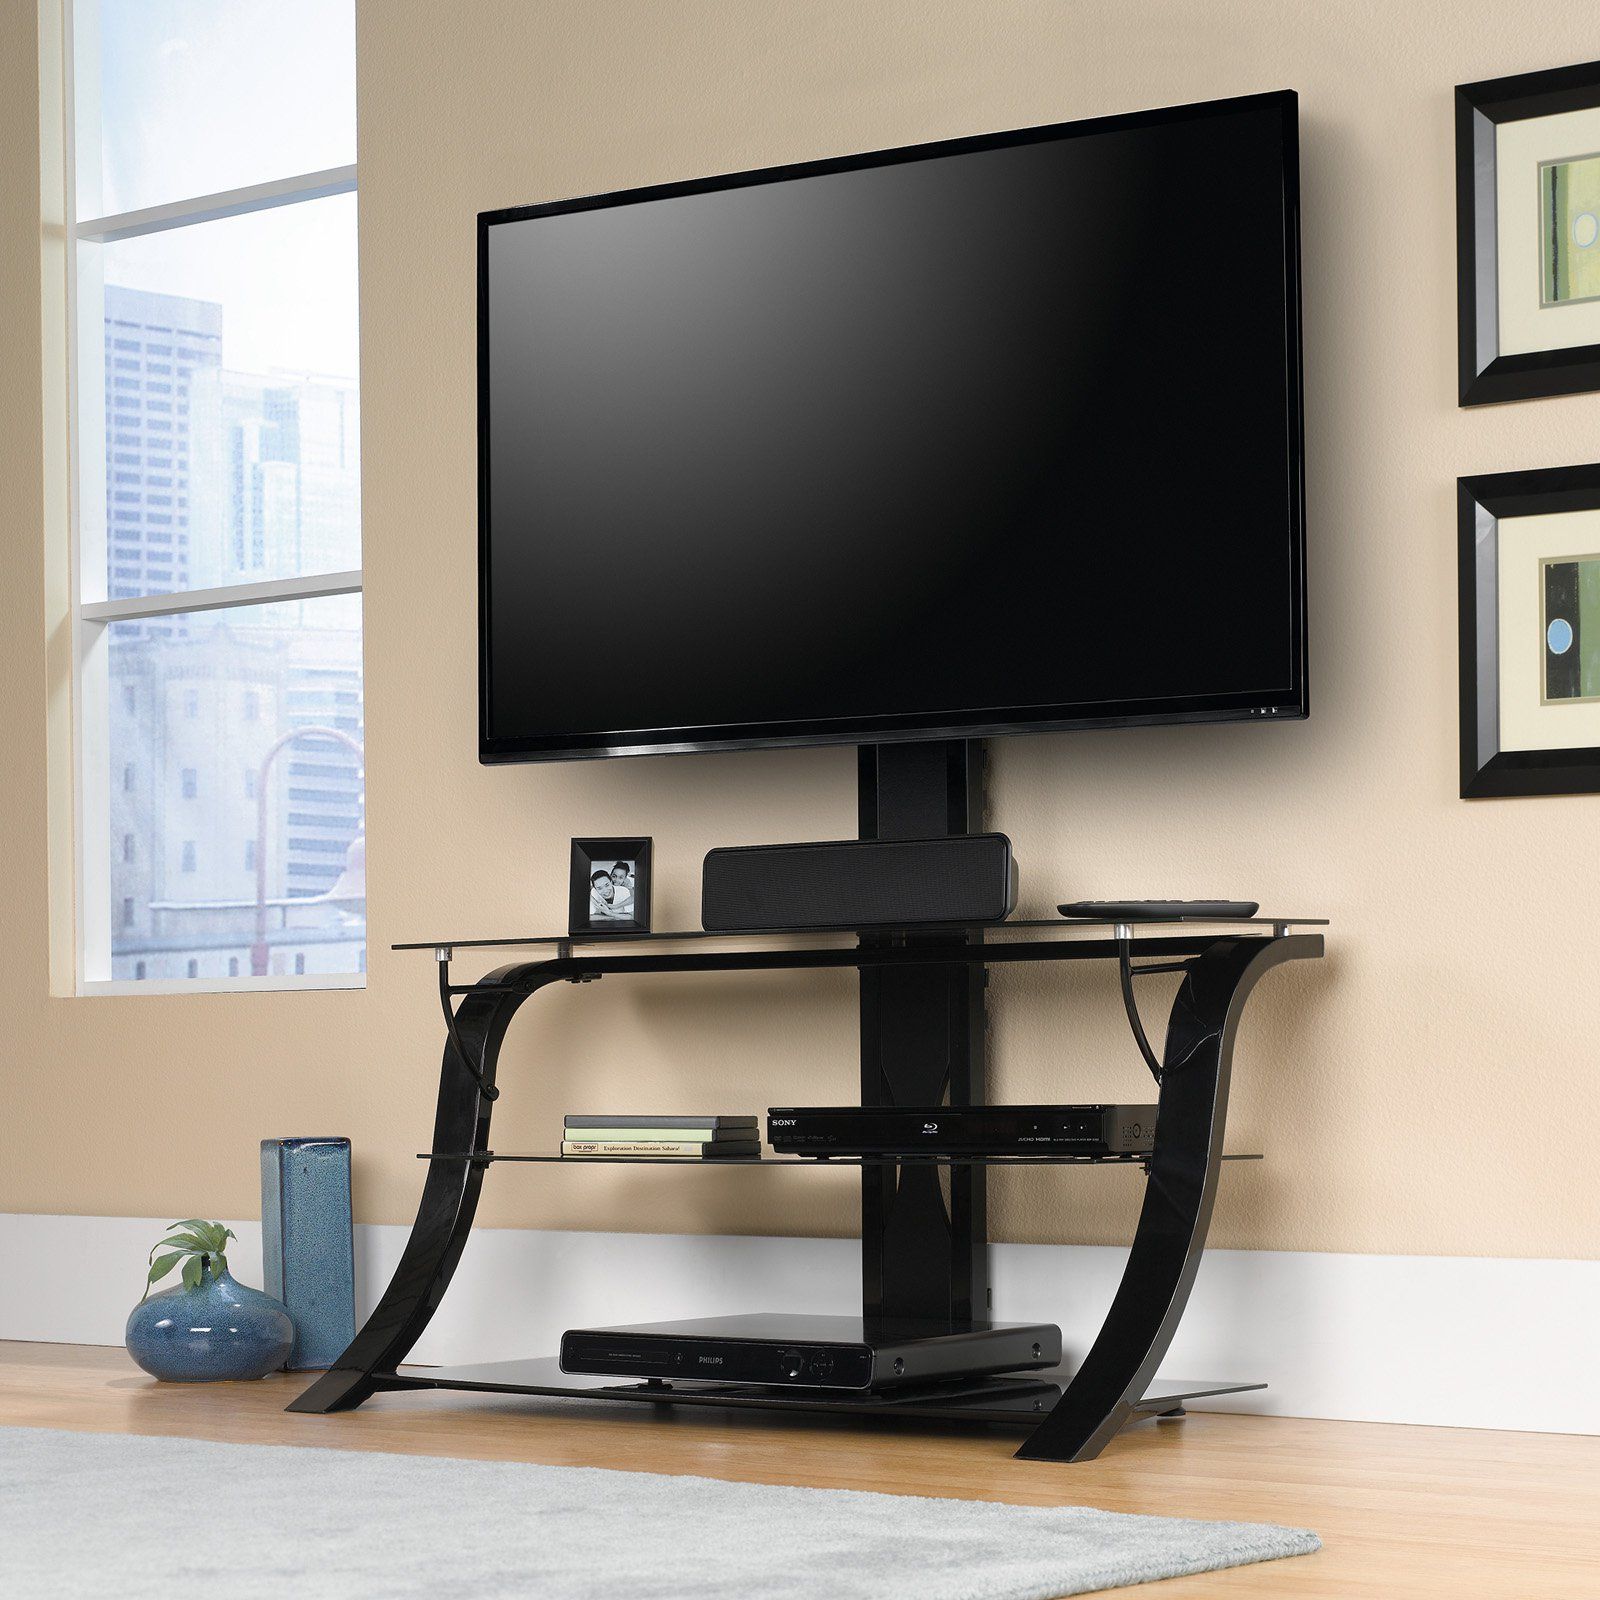 Sauder Panel Tv Stand With Mount For Tvs Up To 50", Black With Regard To Edgeware Black Tv Stands (View 15 of 15)